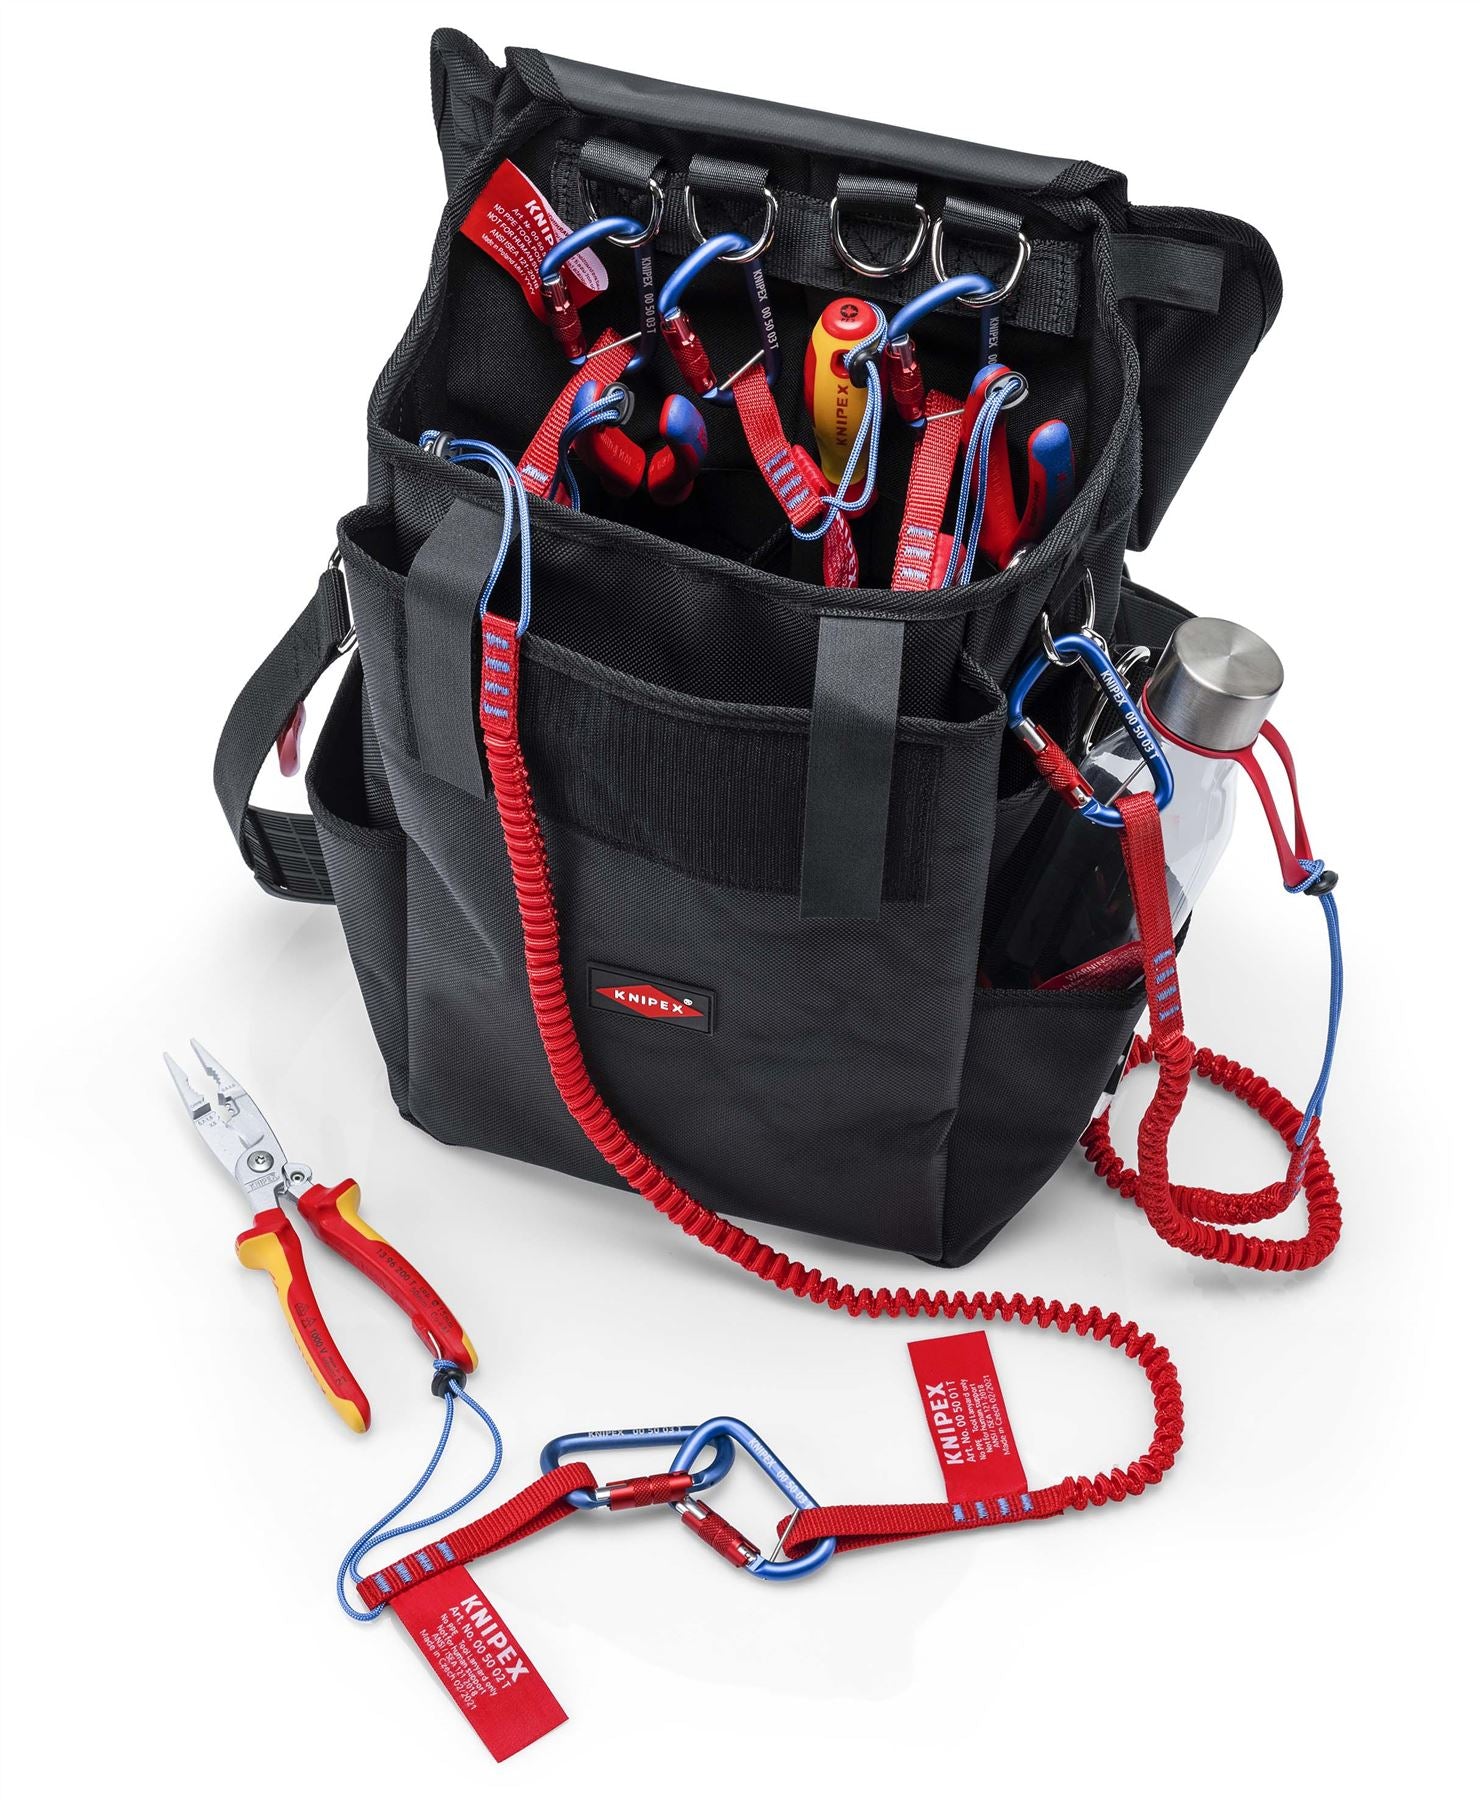 Knipex Tool Bag Case for Working at Heights Large 470 x 250 x 150mm 00 50 51 T LE